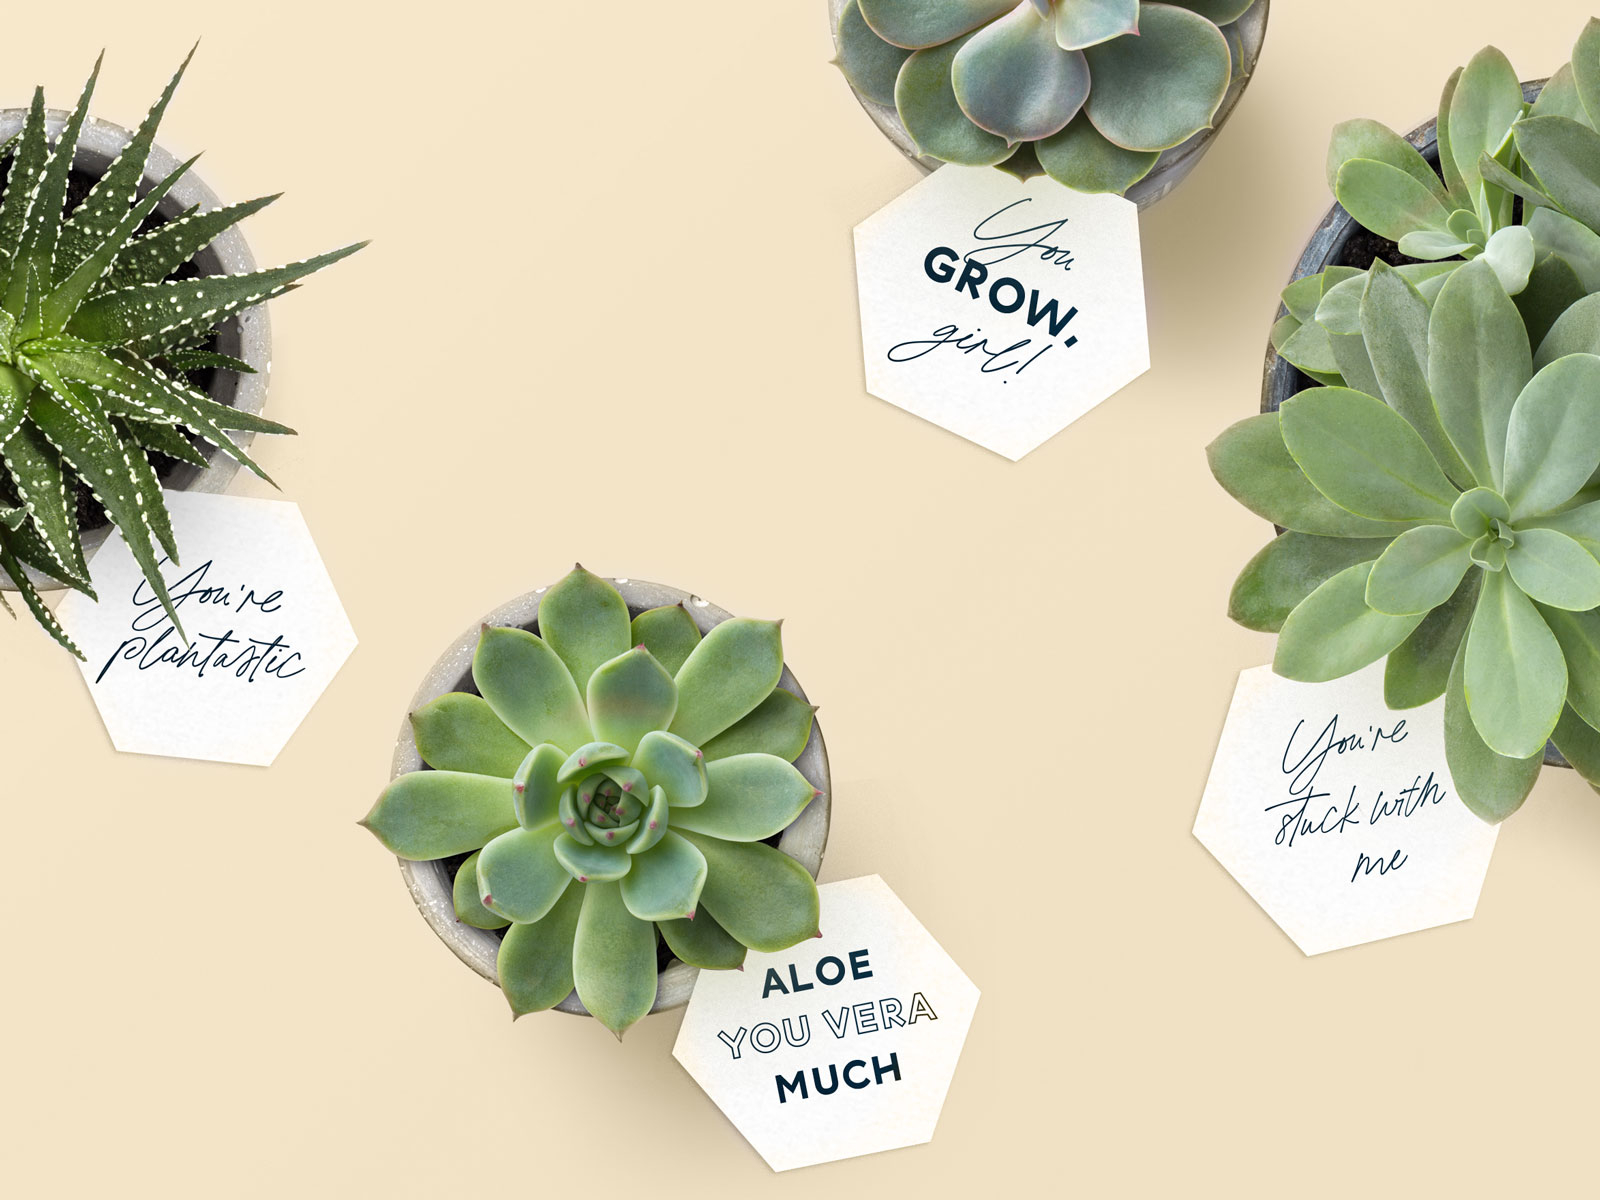 printable-succulent-gift-tags-by-shelby-warwood-for-siege-media-on-dribbble